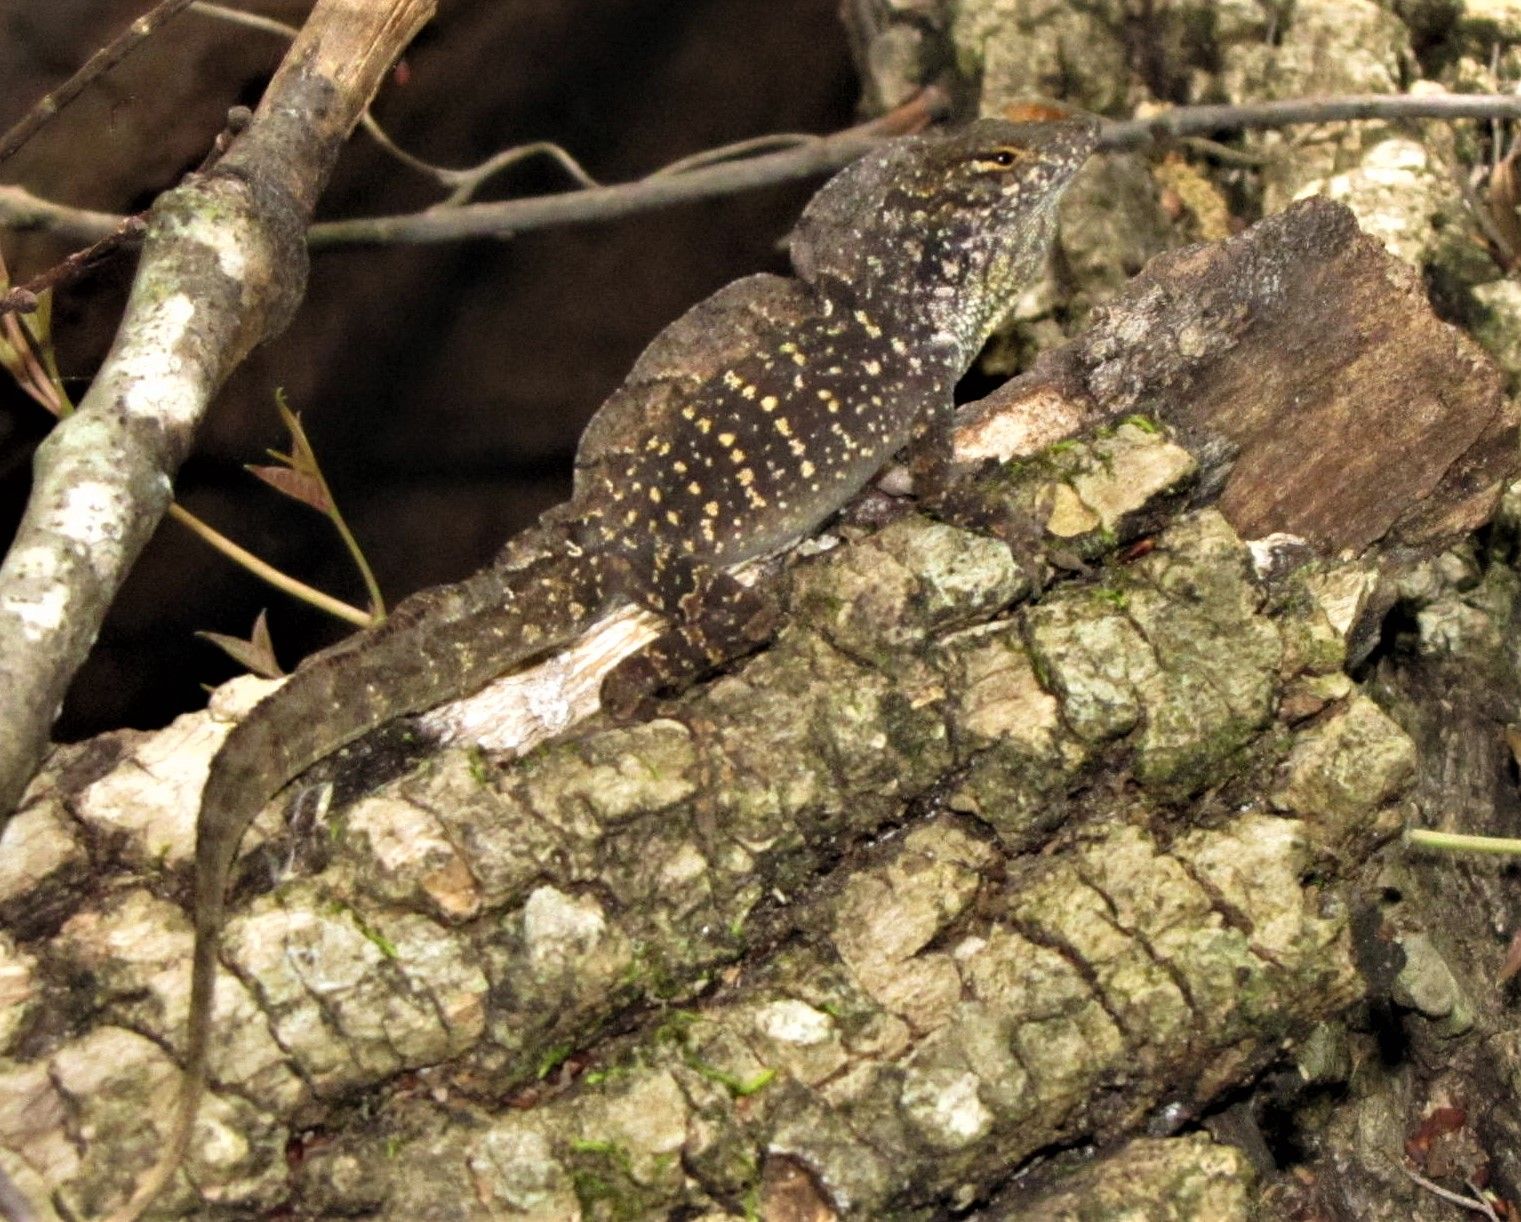 Male brown anoles (Anolis sagrei) may erect a dorsal crest as a territorial display. 